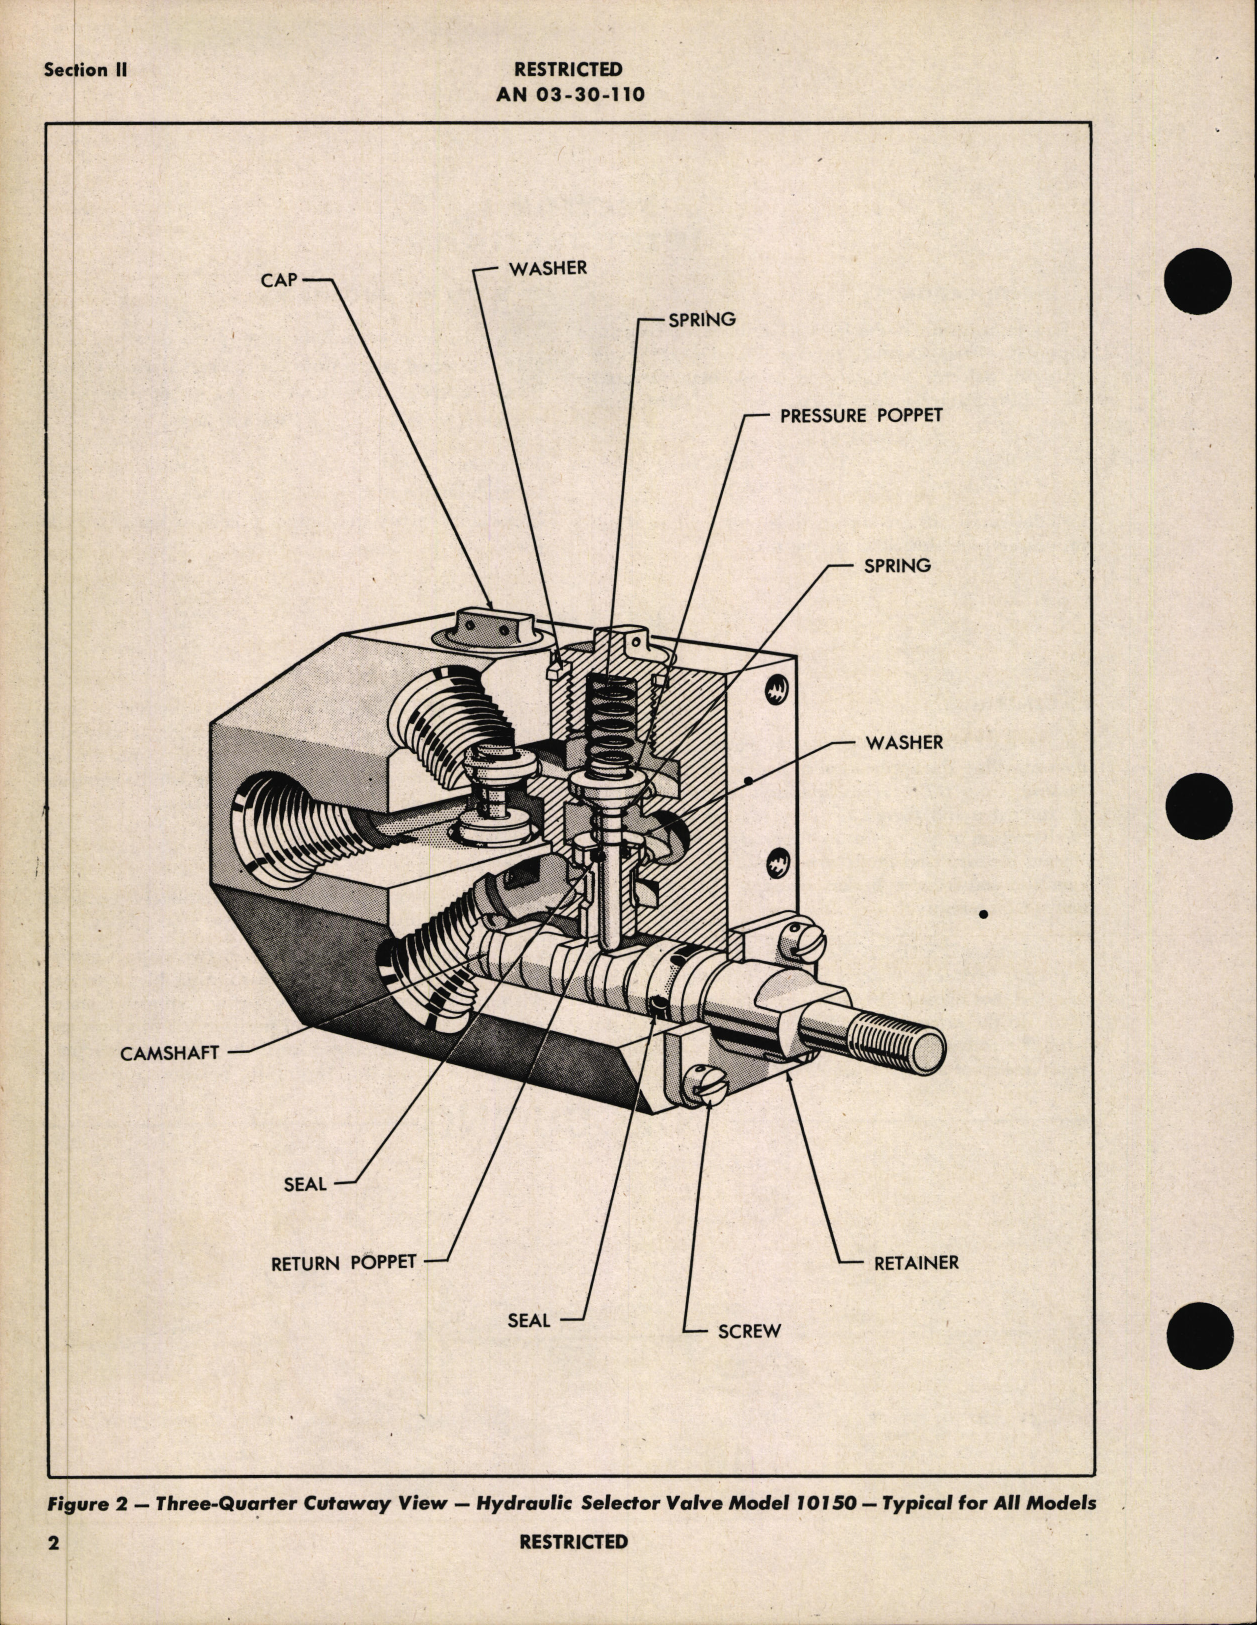 Sample page 6 from AirCorps Library document: Handbook of Instructions with Parts Catalog for Dural Seat Single Hydraulic Selector Valves